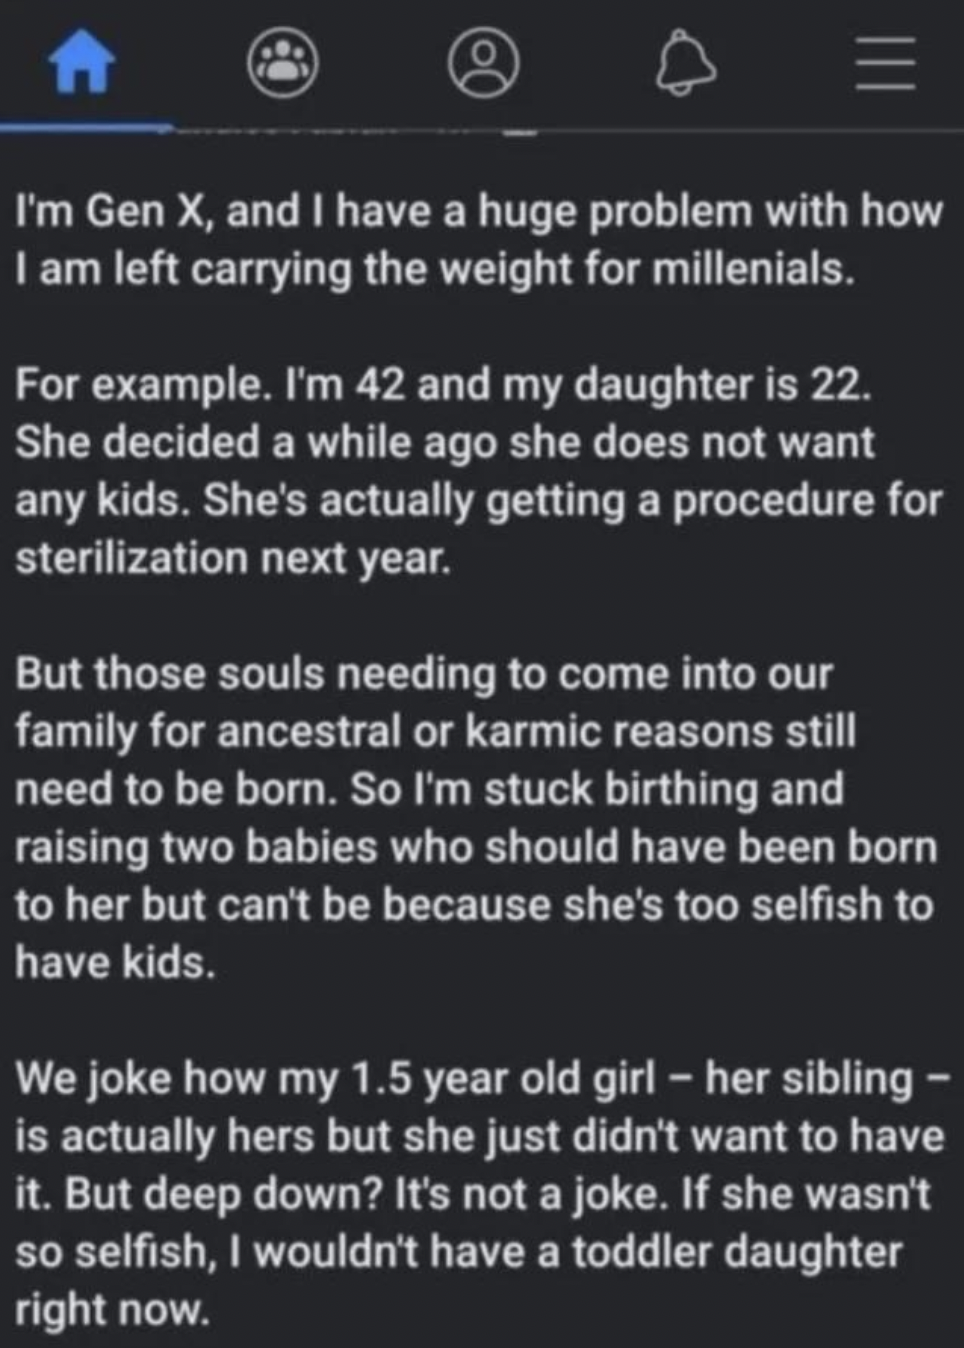 Friday facepalms - i m gen x and i have a huge problem - I'm Gen X, and I have a huge problem with how I am left carrying the weight for millenials. For example. I'm 42 and my daughter is 22. She decided a while ago she does not want any kids. She's actua